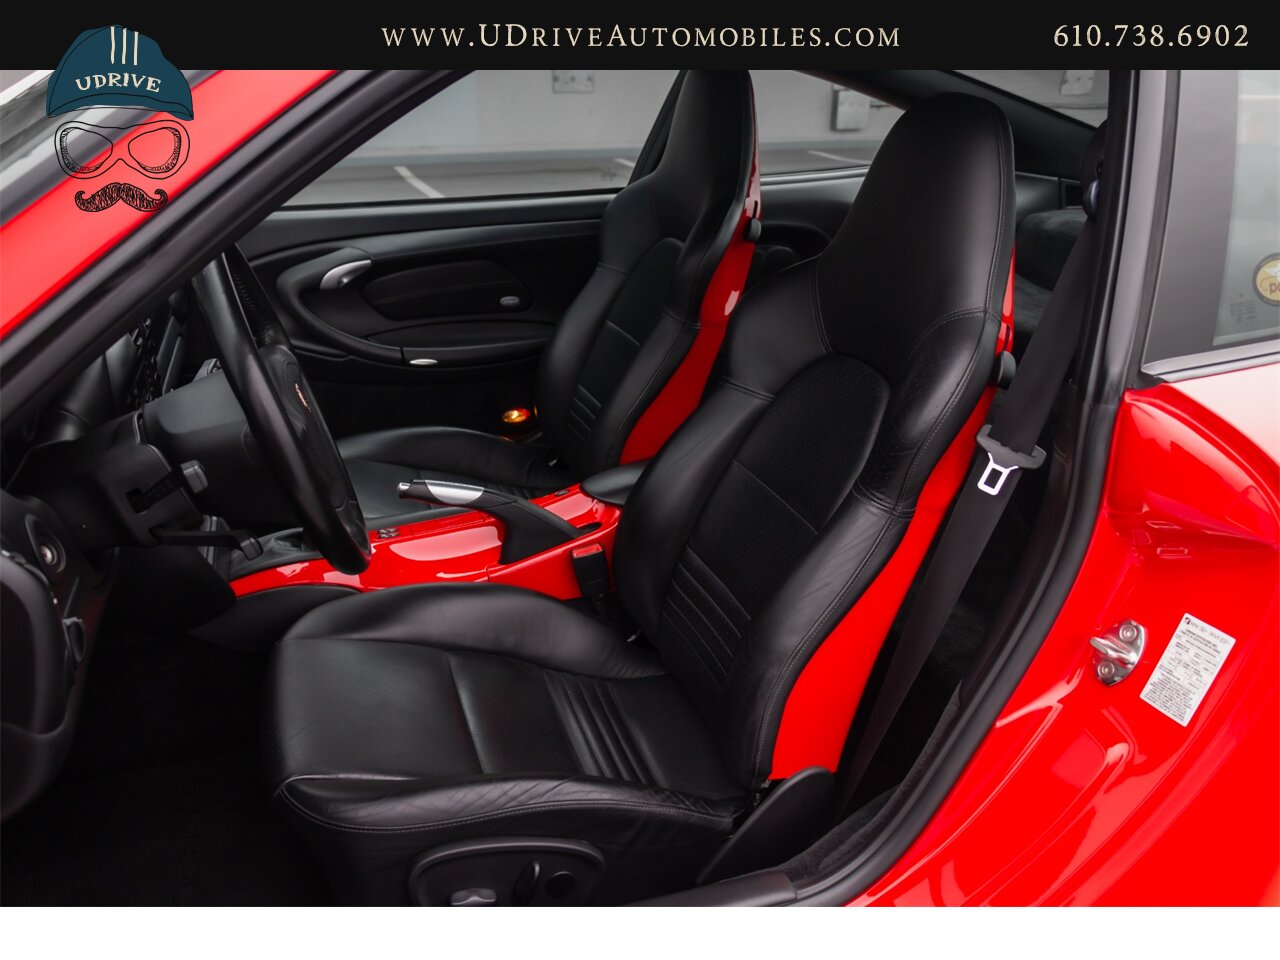 2004 Porsche 911 996 GT3 Guards Red Sport Seats Painted Hardbacks  Painted Center Console 18k Miles - Photo 7 - West Chester, PA 19382